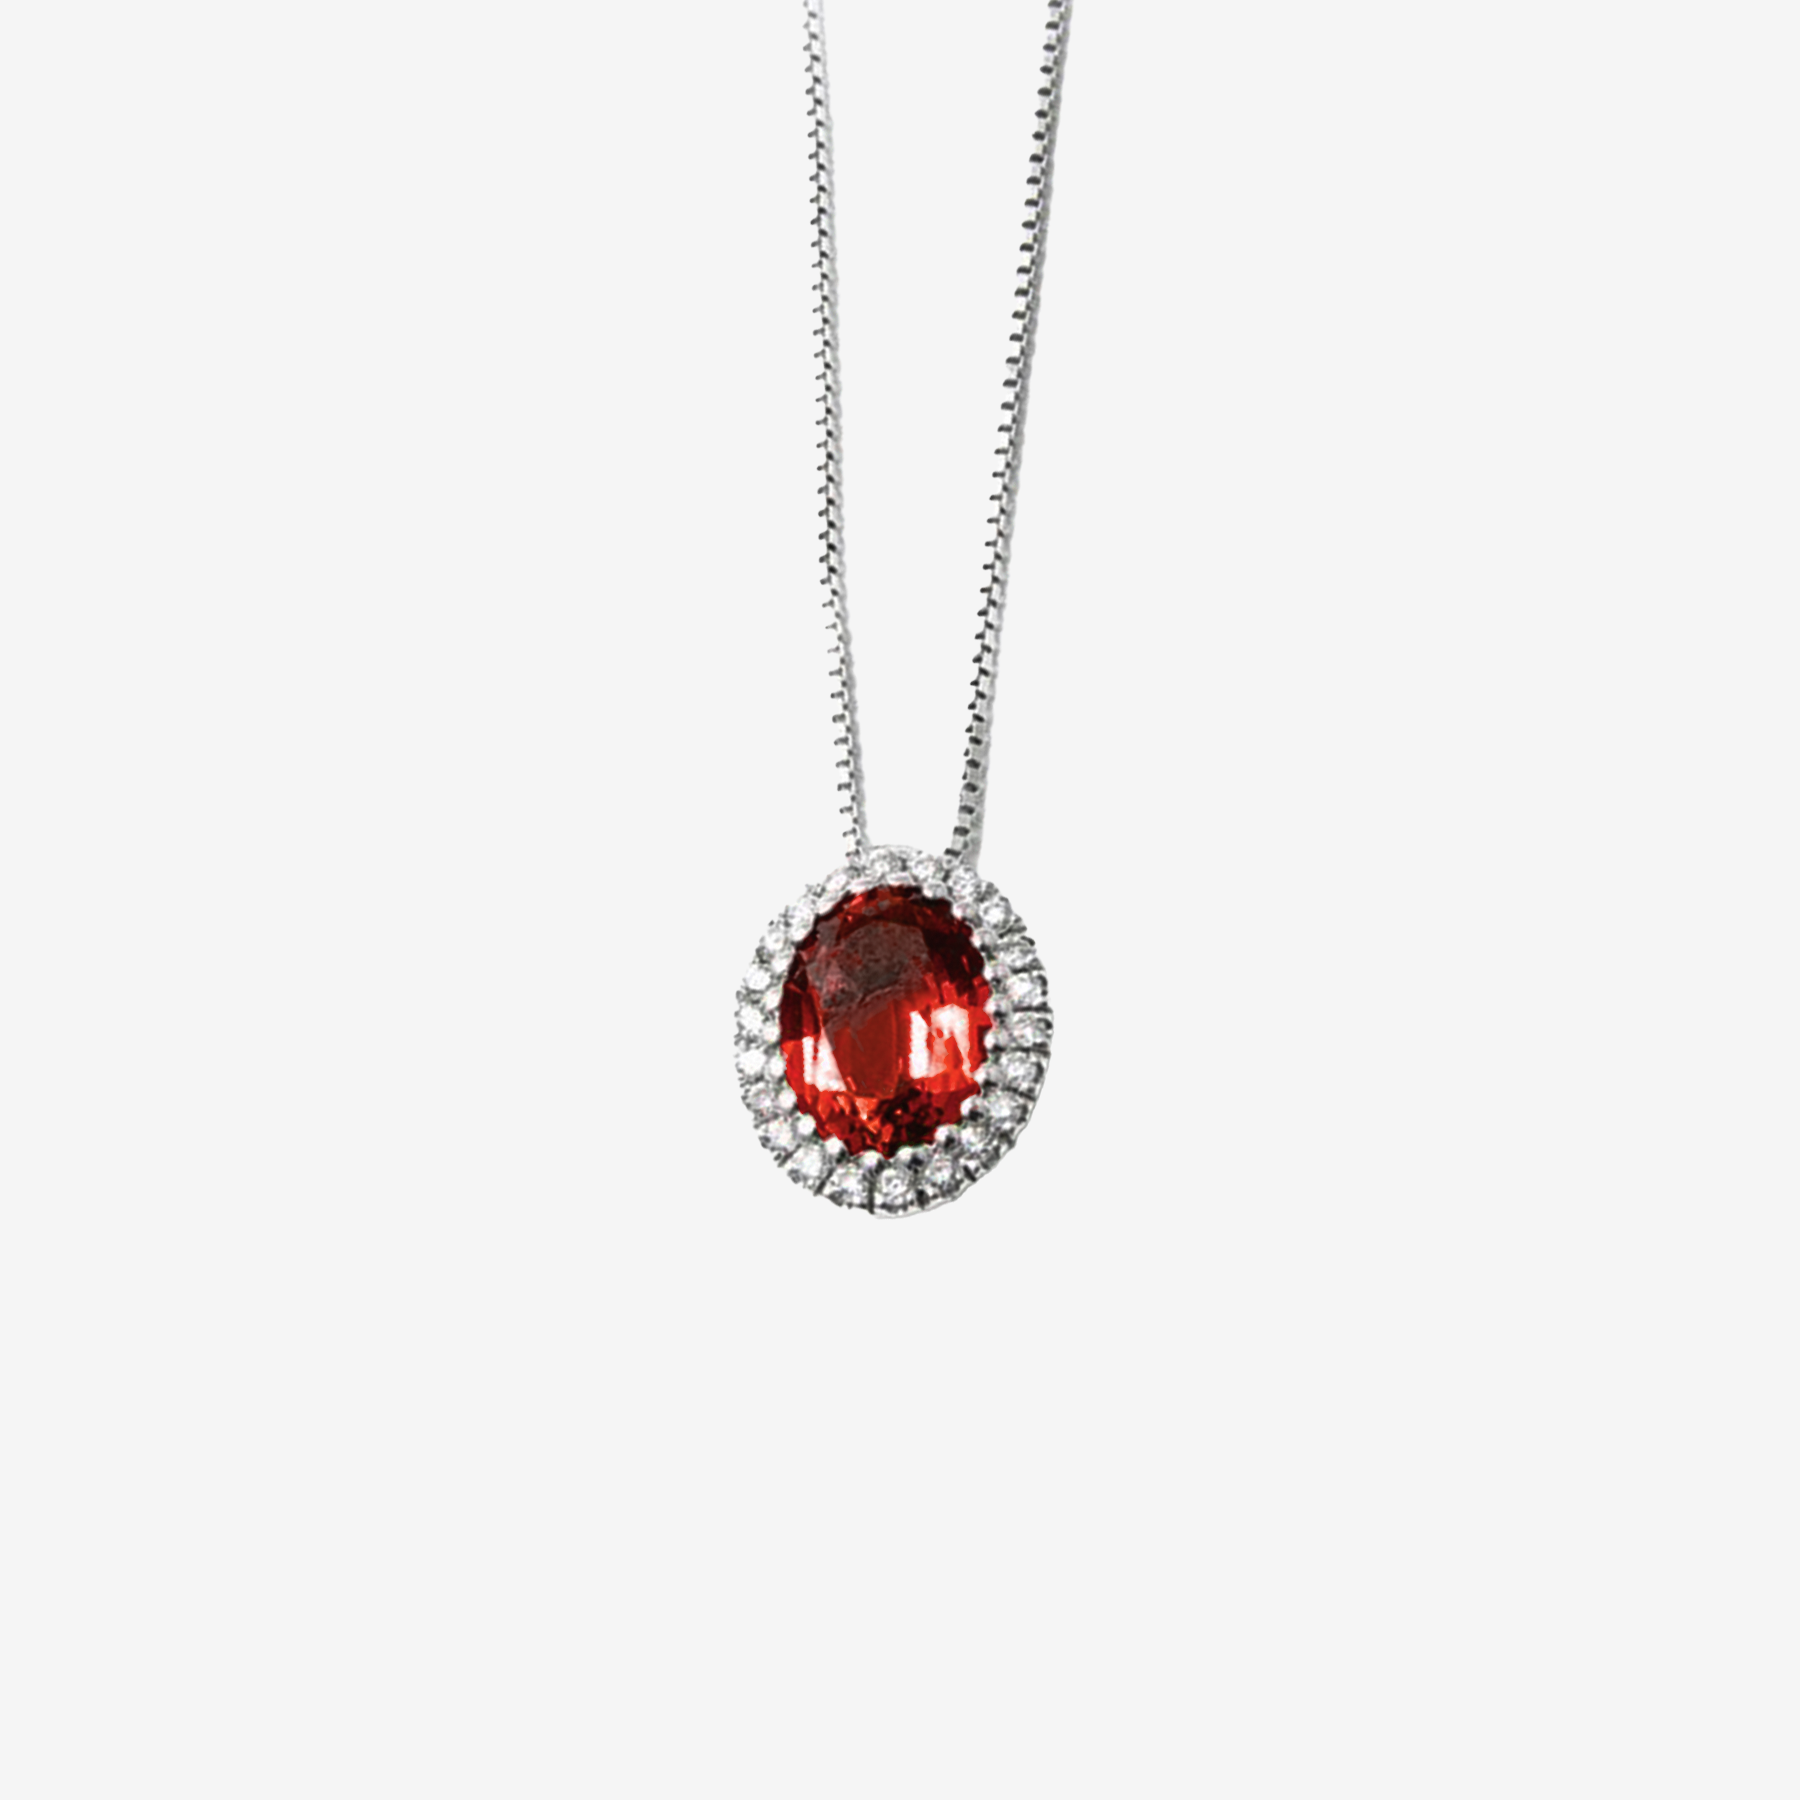 Necklace with rubies and diamonds 